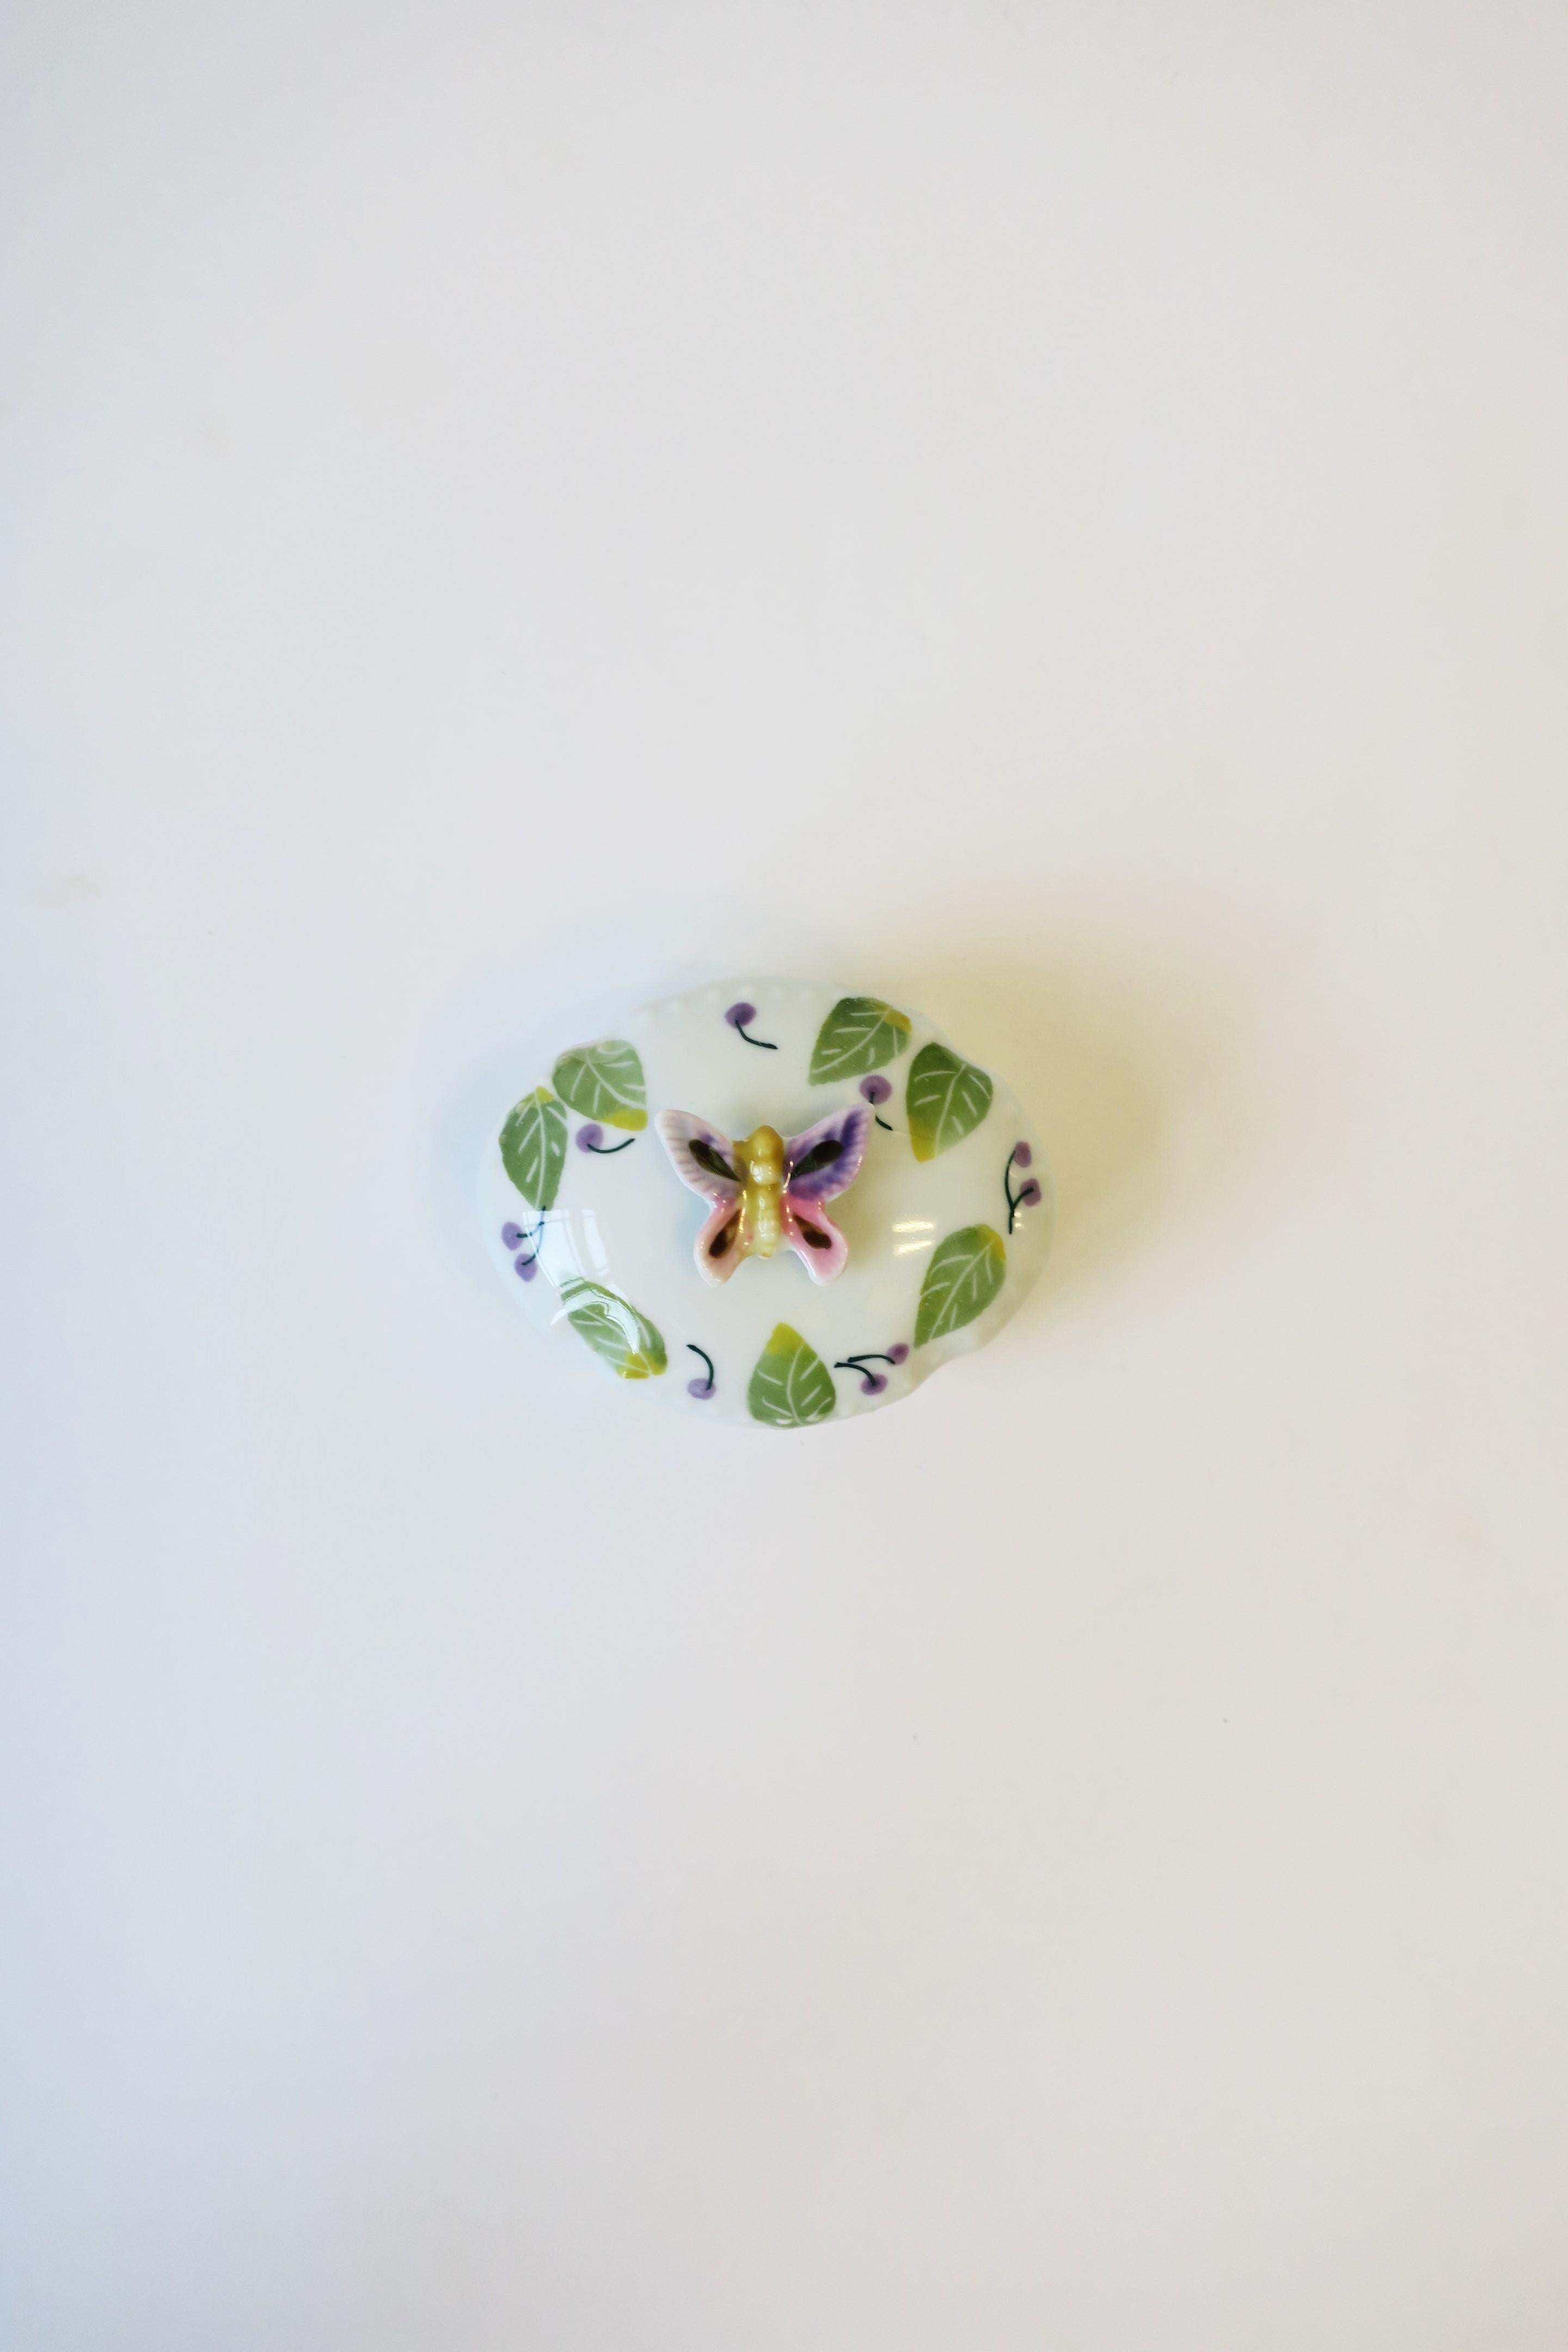 A beautiful small white porcelain oval jewelry or trinket box with colorful butterfly, leaves and cherries, circa mid to late-20th century. Piece has a raised butterfly knob on lid; an easy open close to place jewelry or other small items on a desk,